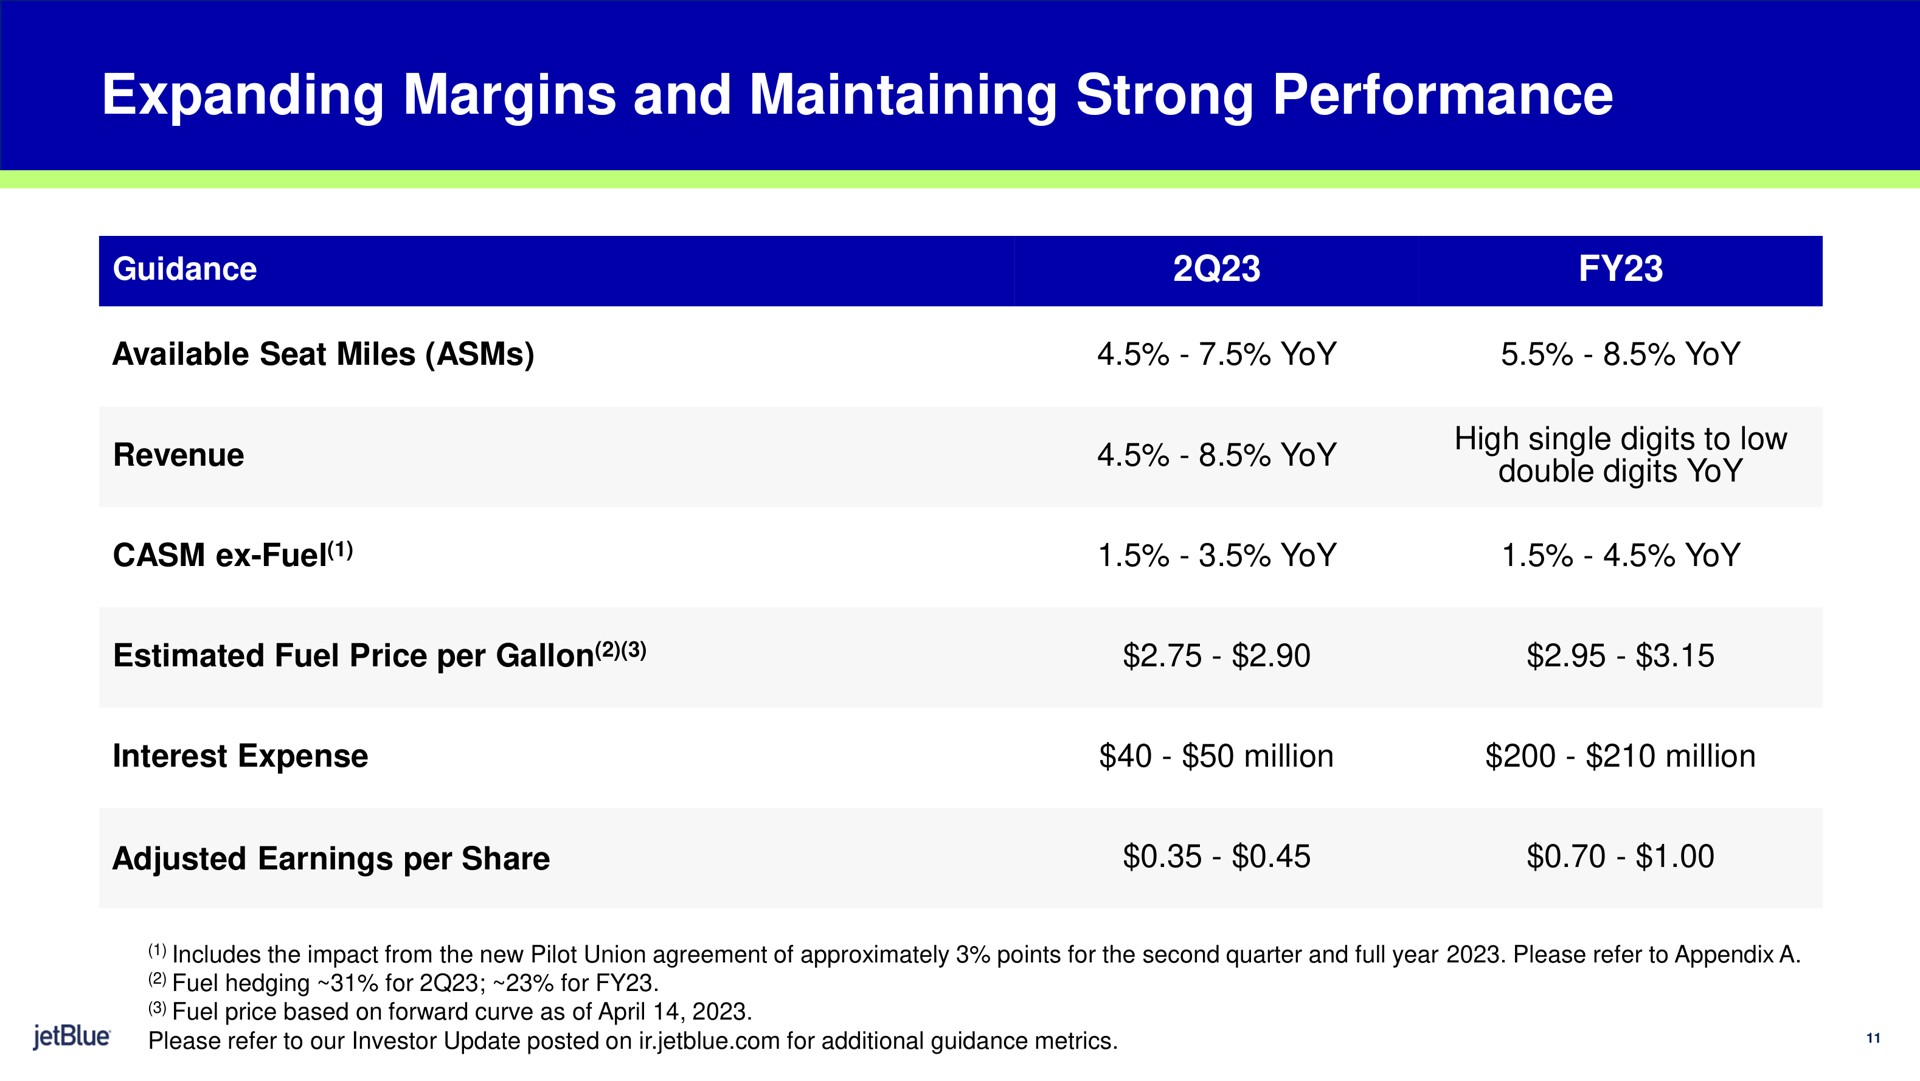 expanding margins and maintaining strong performance guidance available seat miles yoy yoy revenue fuel yoy high single digits to low double digits yoy yoy yoy estimated fuel price per gallon interest expense million million adjusted earnings per share i | jetBlue